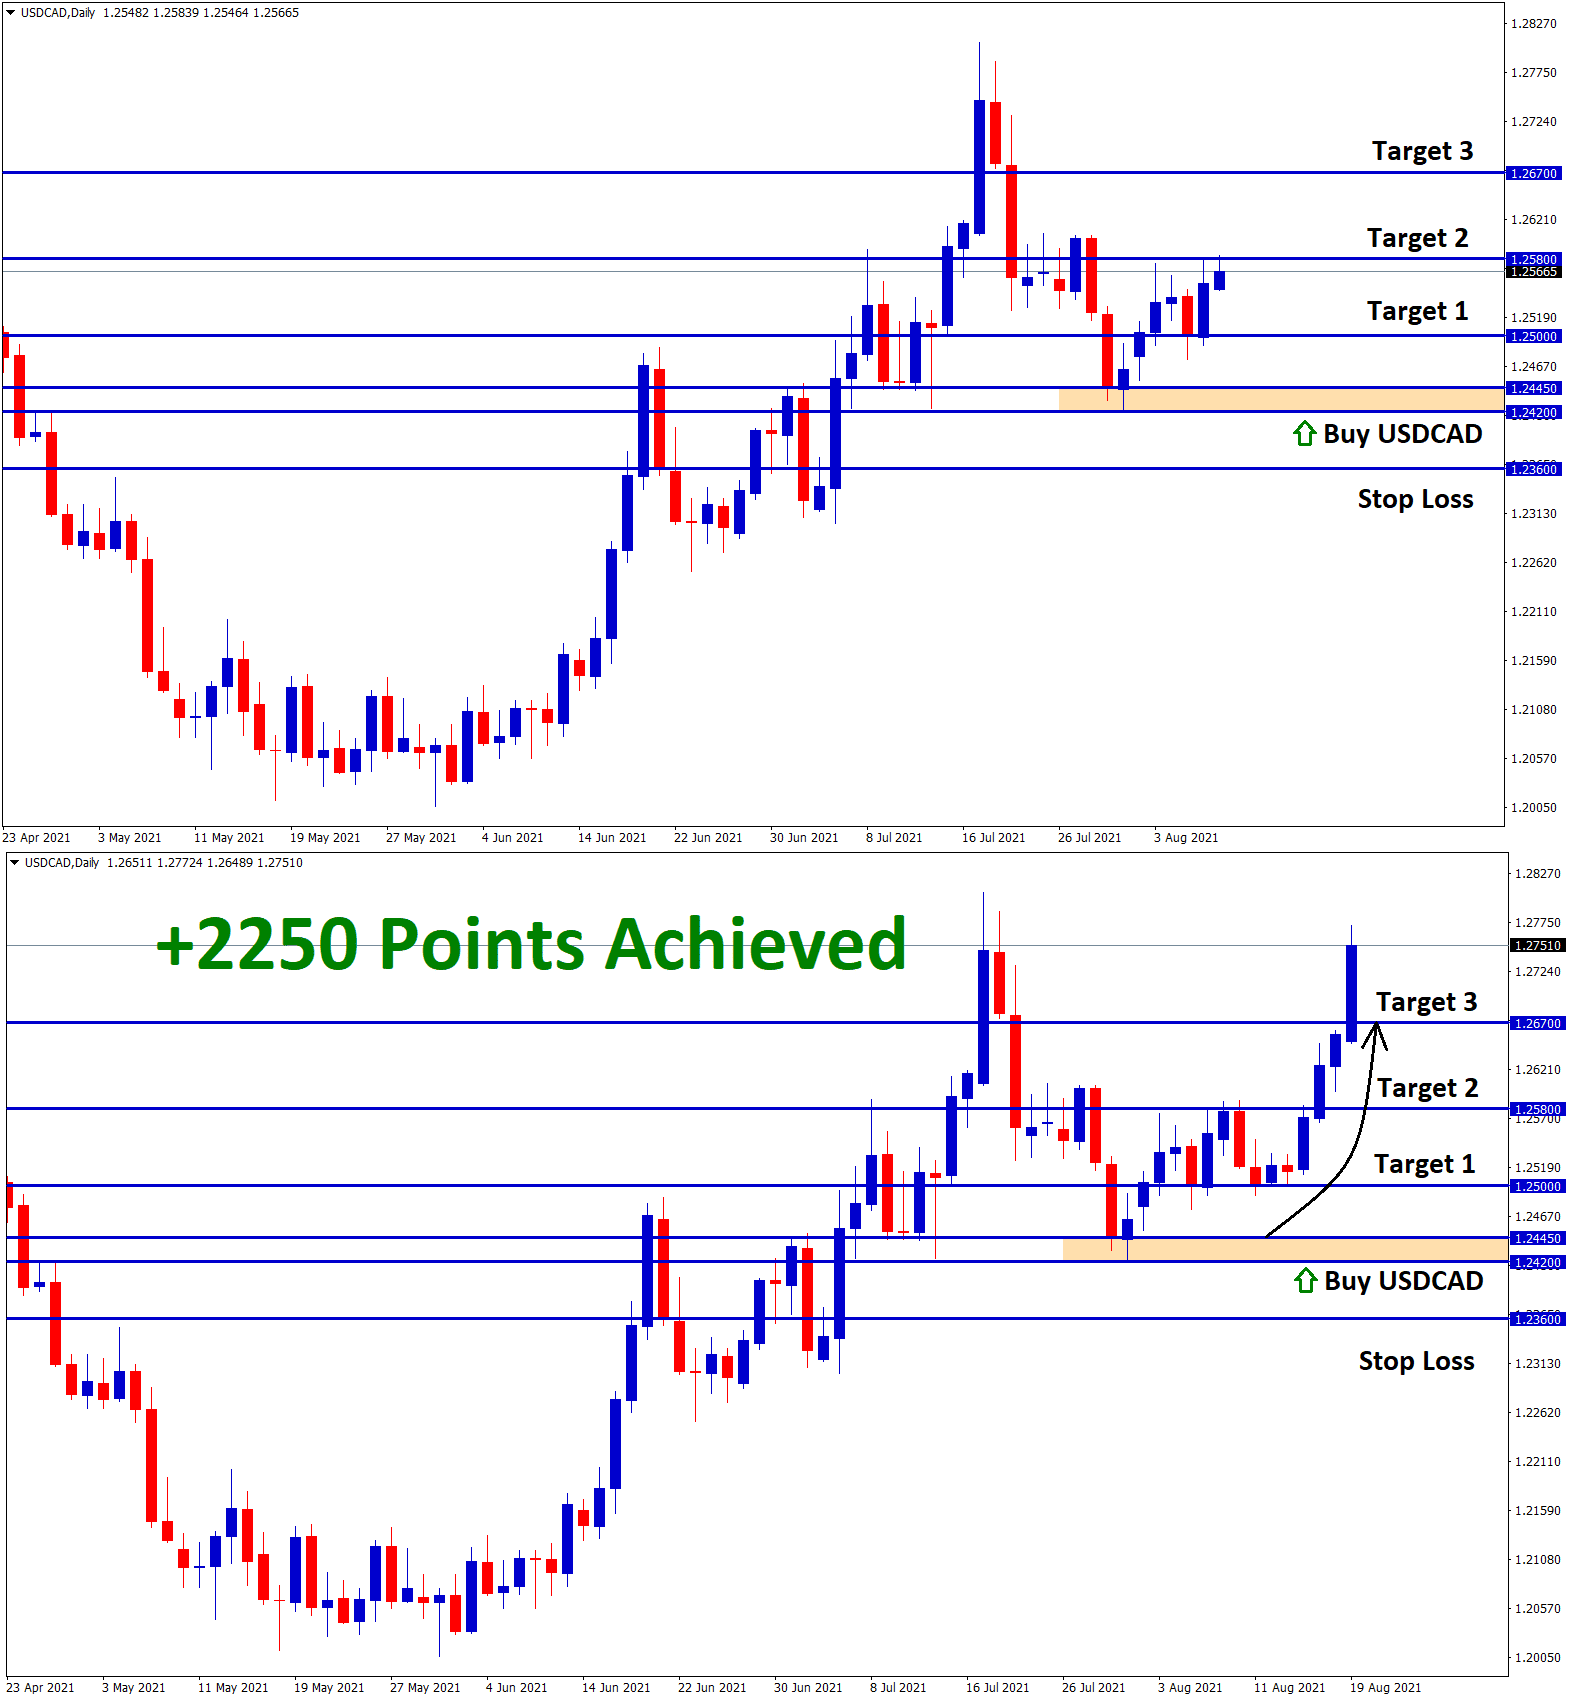 2250 Points achieved in USDCAD Jul30 T3 Aug19